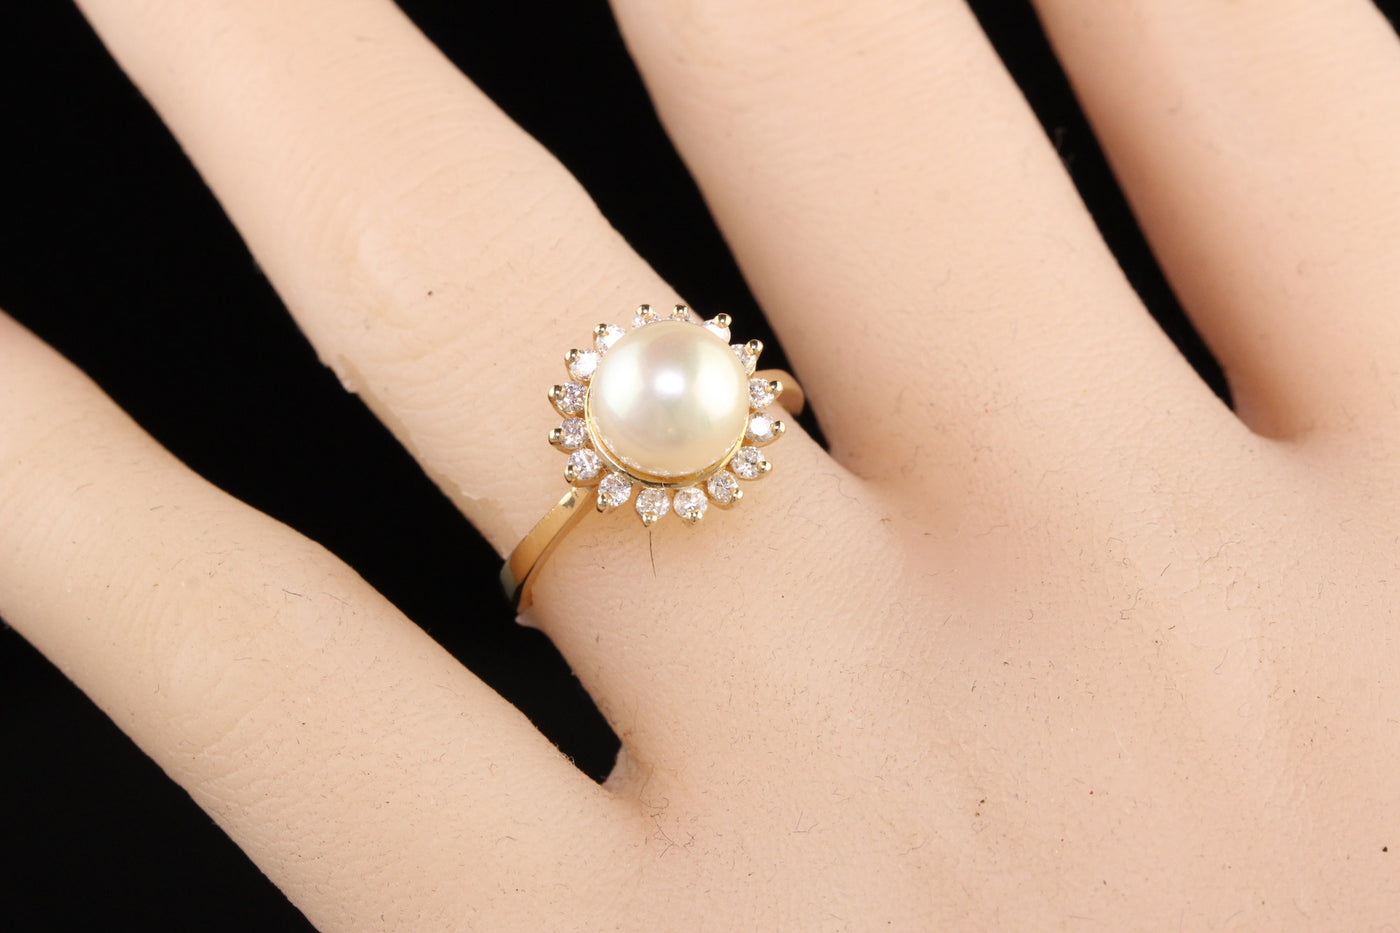 14K Yellow Gold Pearl and Diamond Halo Ring